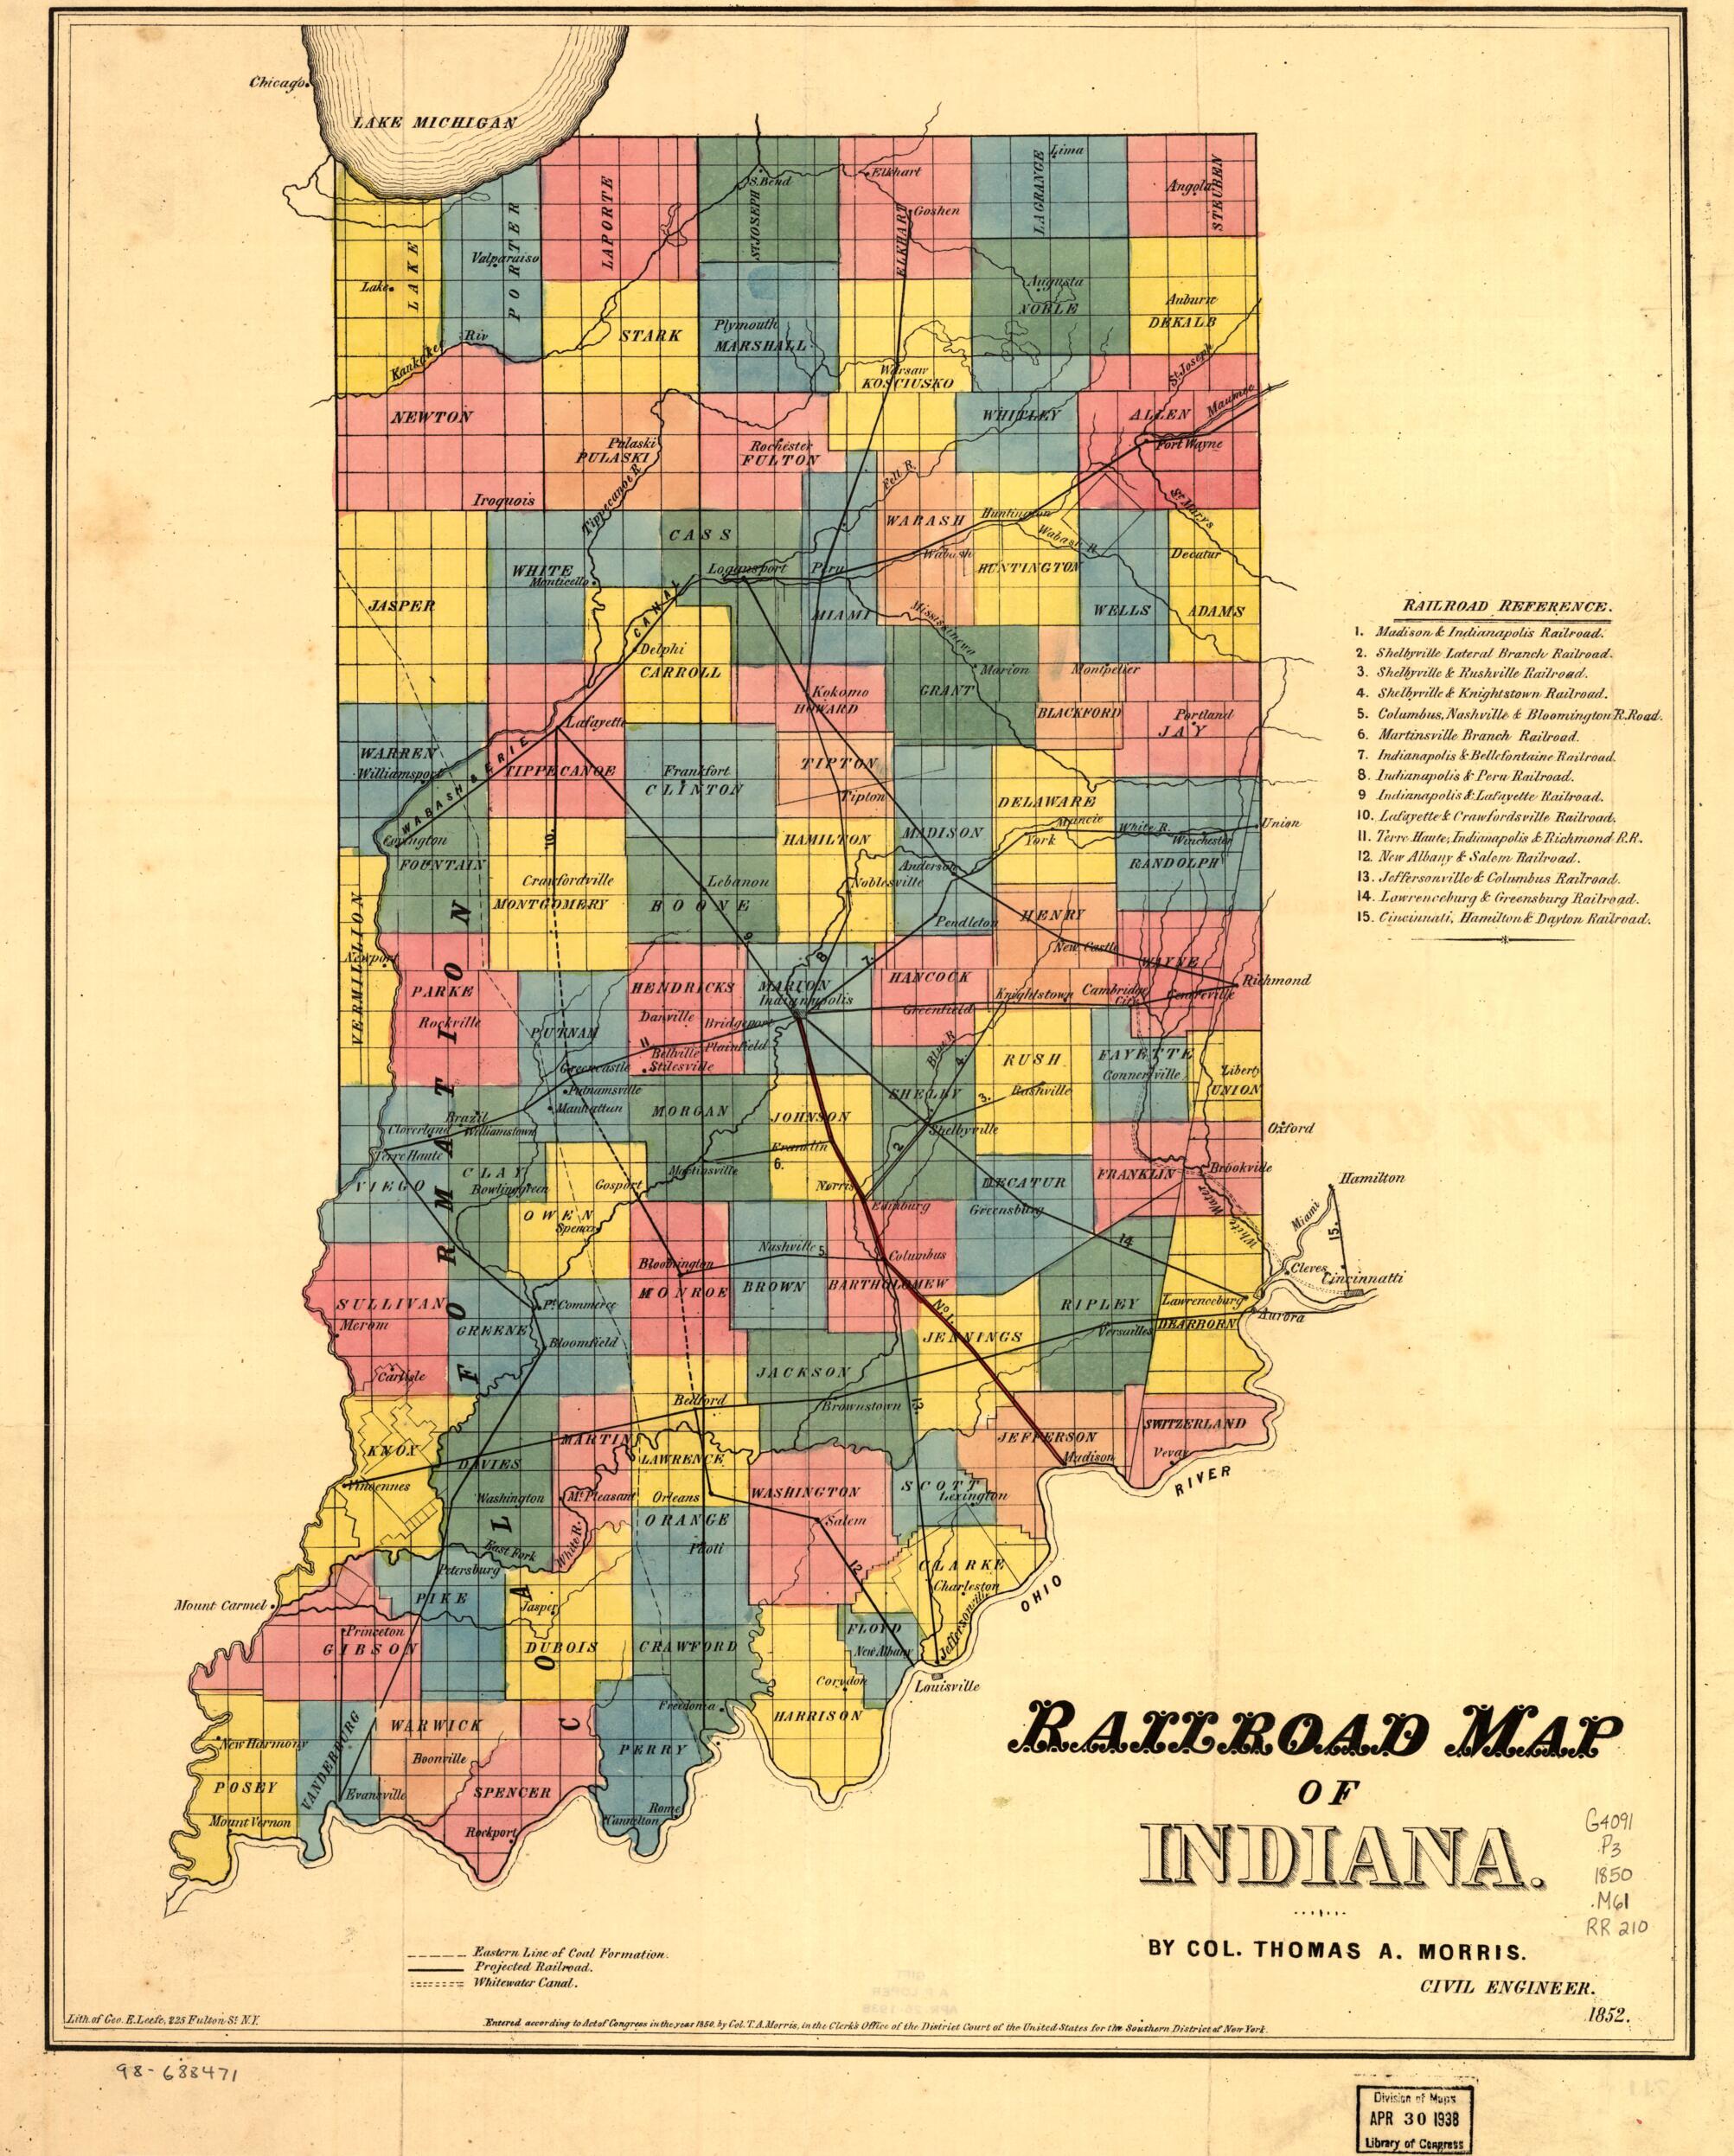 This old map of Railroad Map of Indiana from 1852 was created by Thomas A. (Thomas Armstrong) Morris in 1852